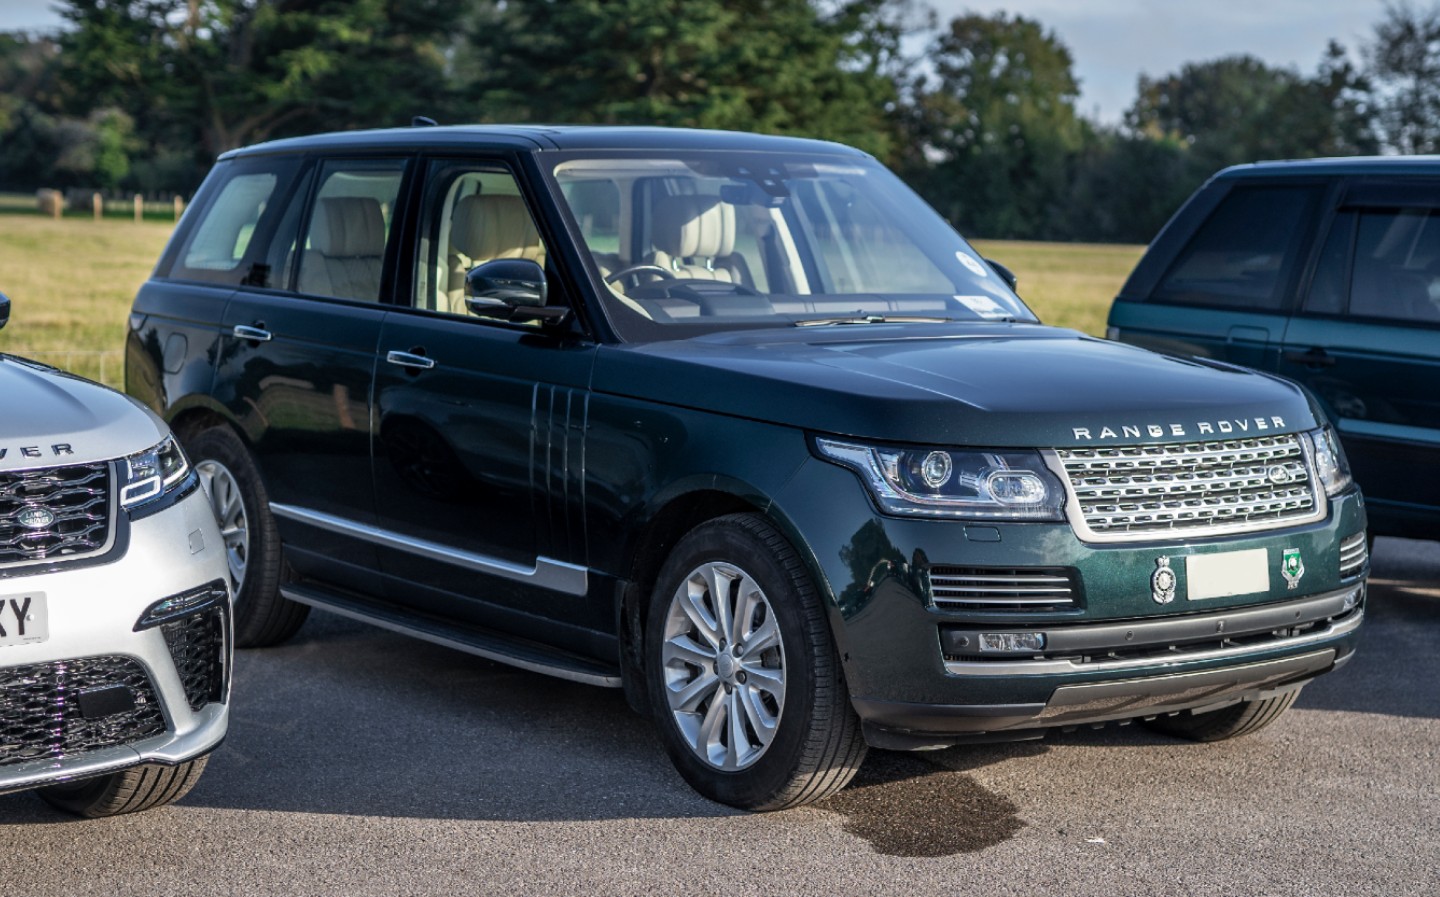 Range Rover at 50: From a Royal Rangie to one bought by a member of Queen, meet the star cars and their owners - RichardBeddall The Queen's Range Rover